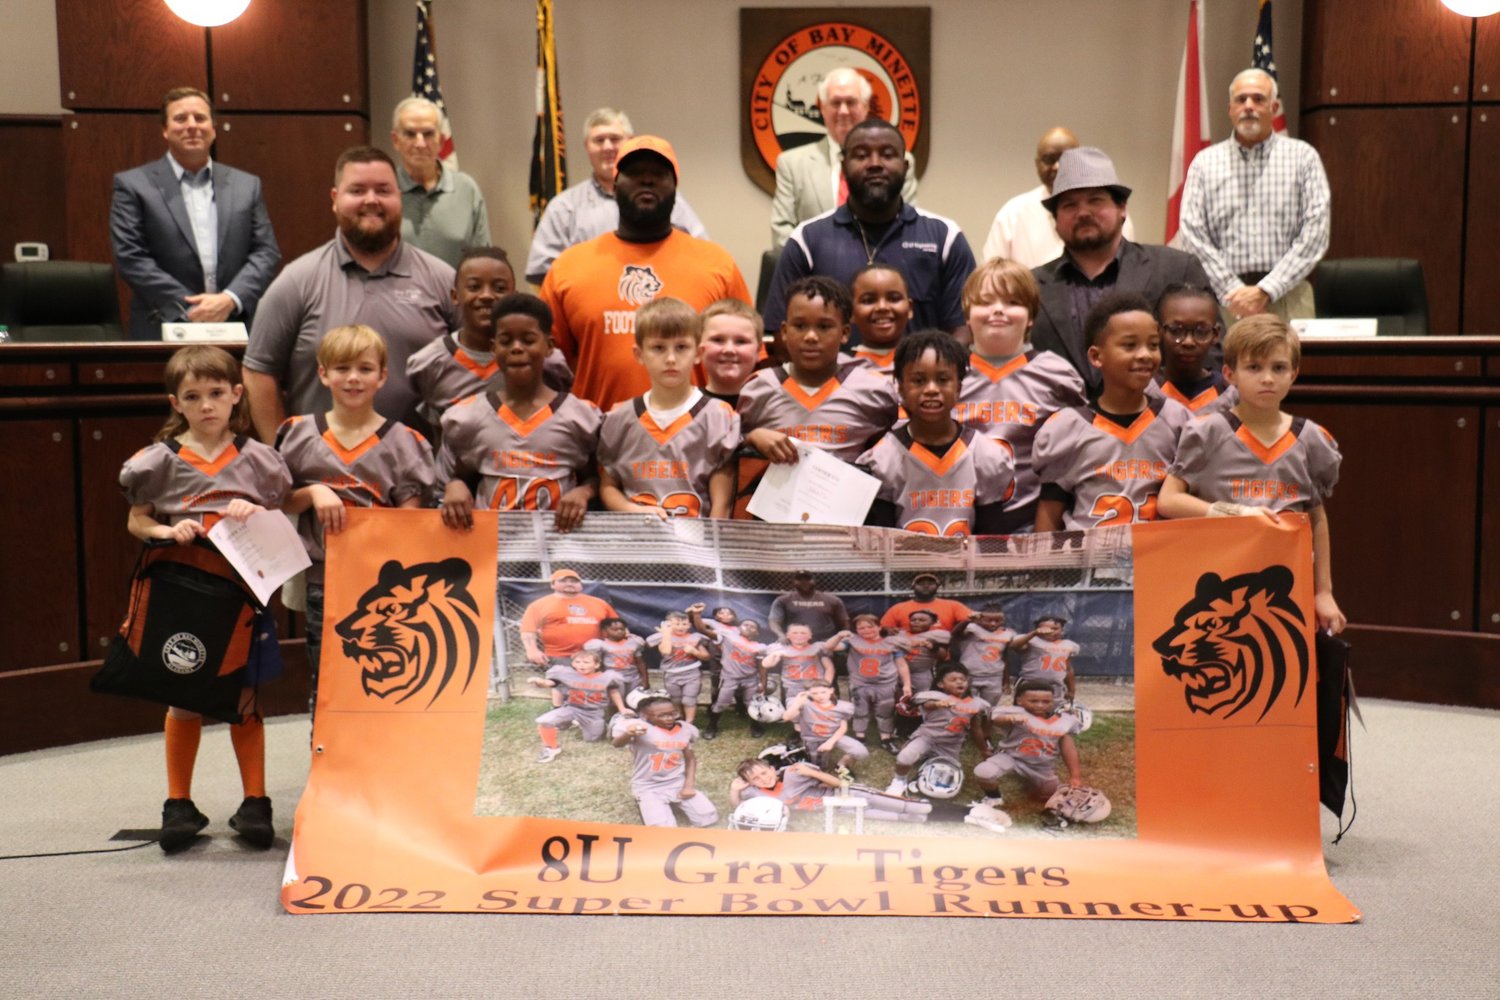 Bay Minette’s 8U Grey team was honored at the Dec. 5 council meeting after they reached the Super Bowl in the Baldwin County Youth Football Association and finished with an 8-3 overall record. Pete Watson served as head coach and Dillon Goins and Marcello Palmer are assistant coaches.